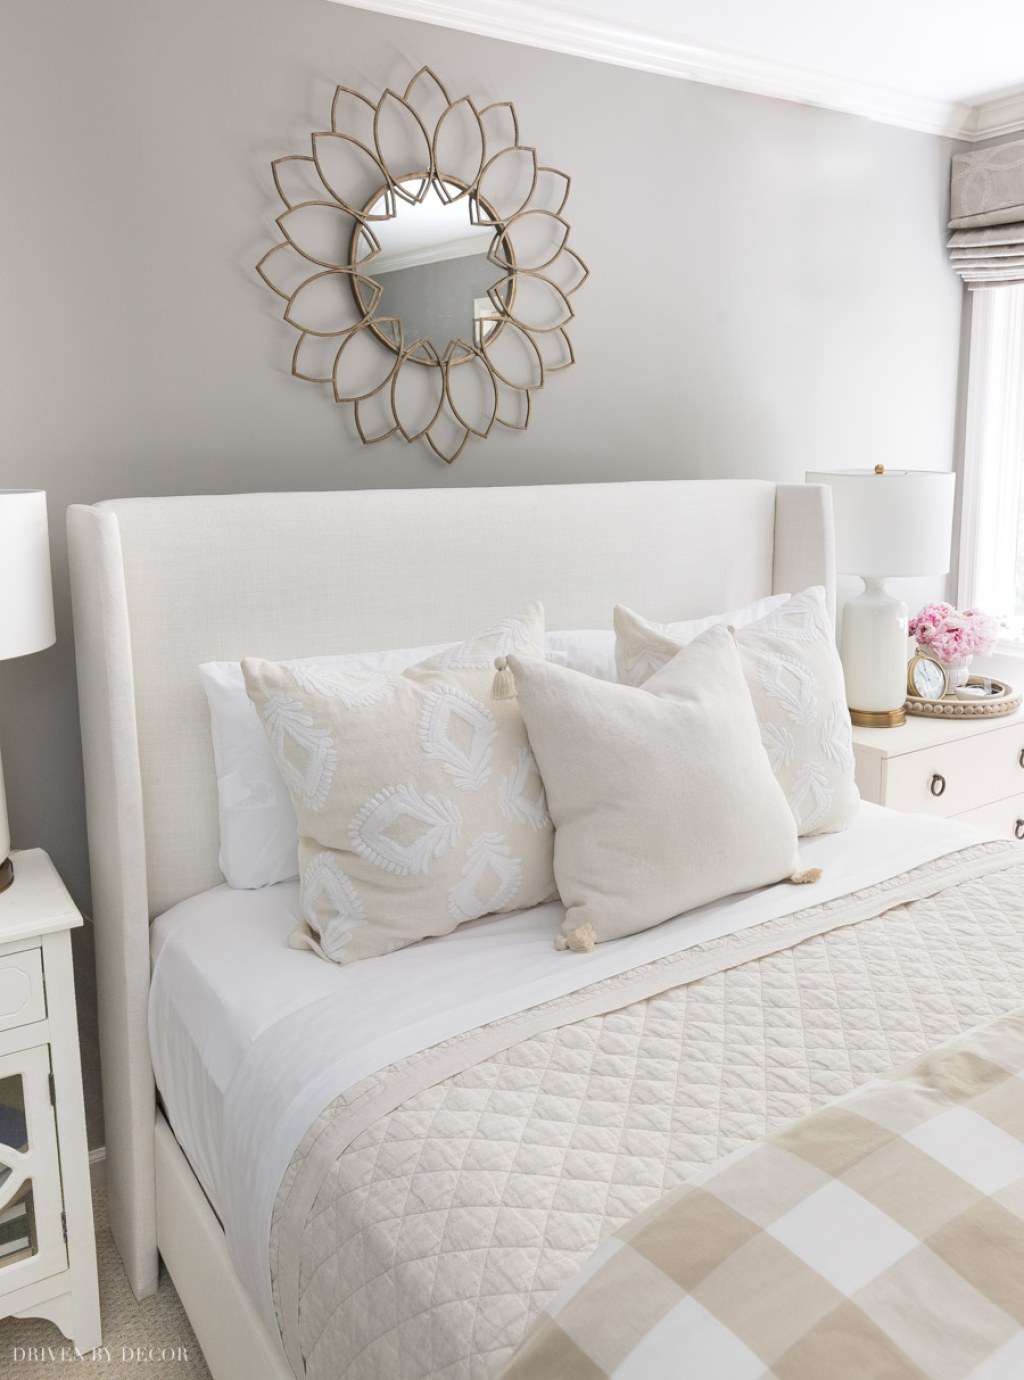 Picture of: Above Bed Decor:  Ideas for Decorating That Tricky Space